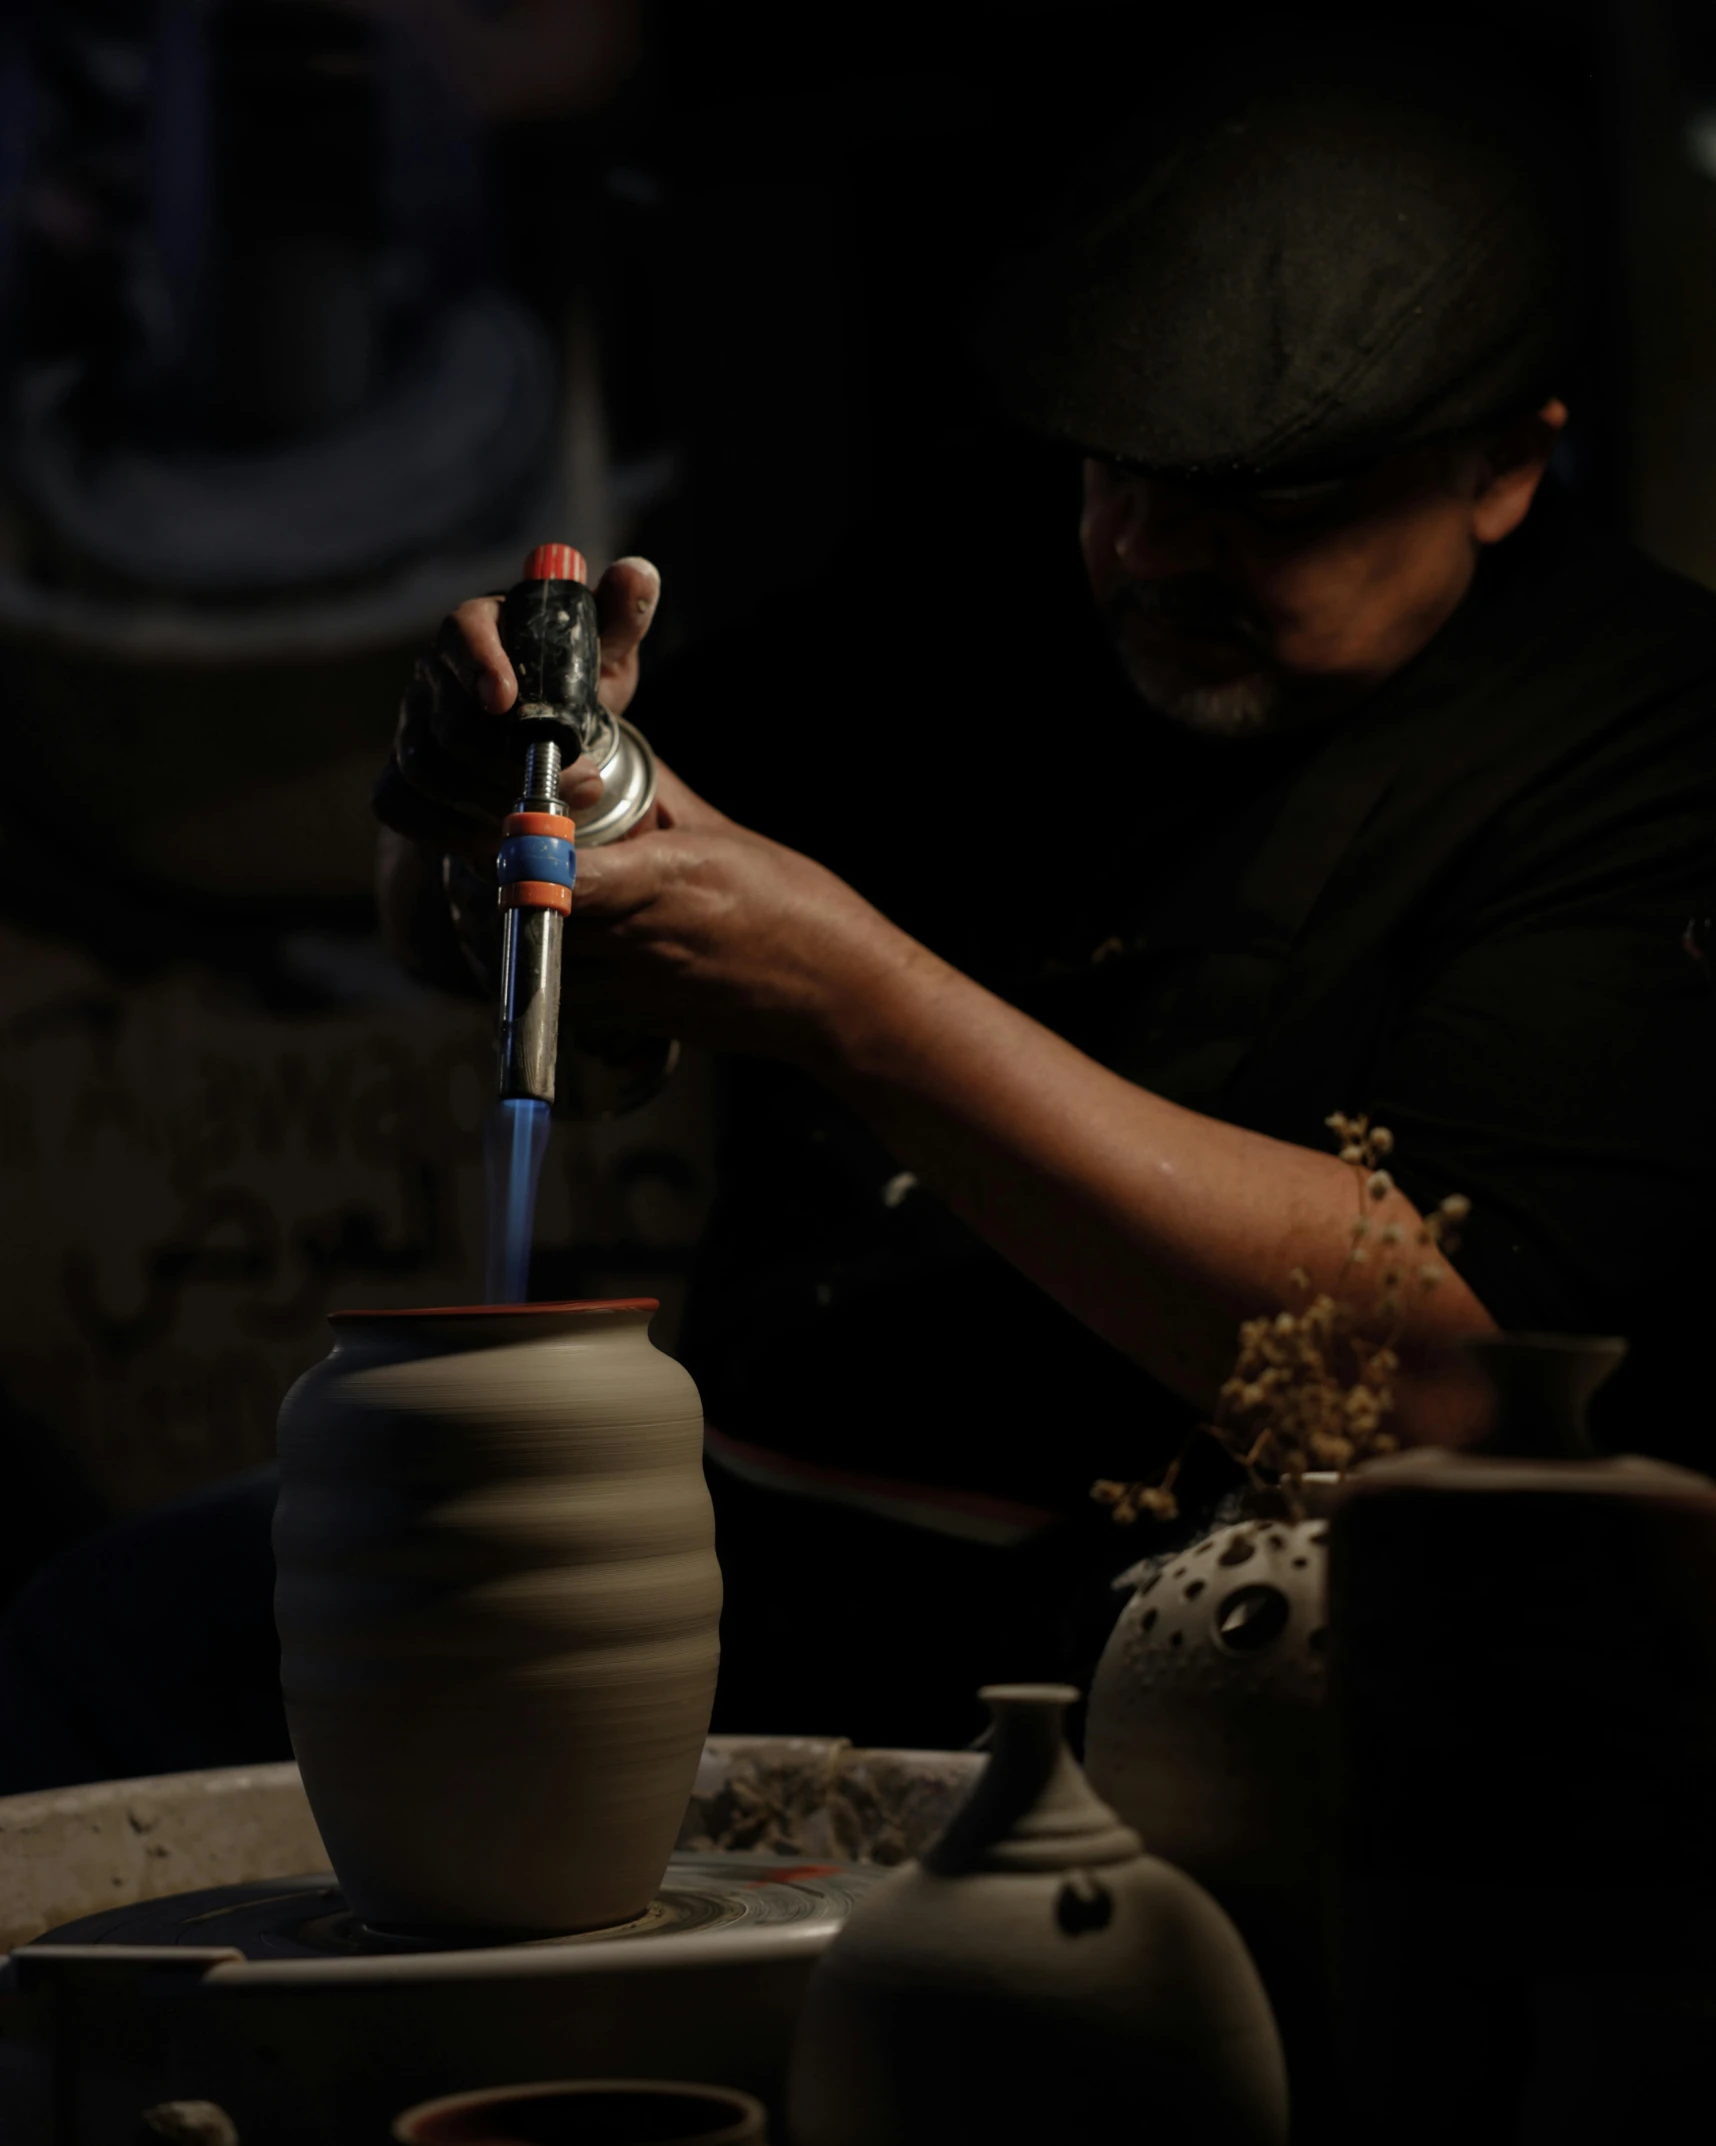 there is a male pottery worker making vases